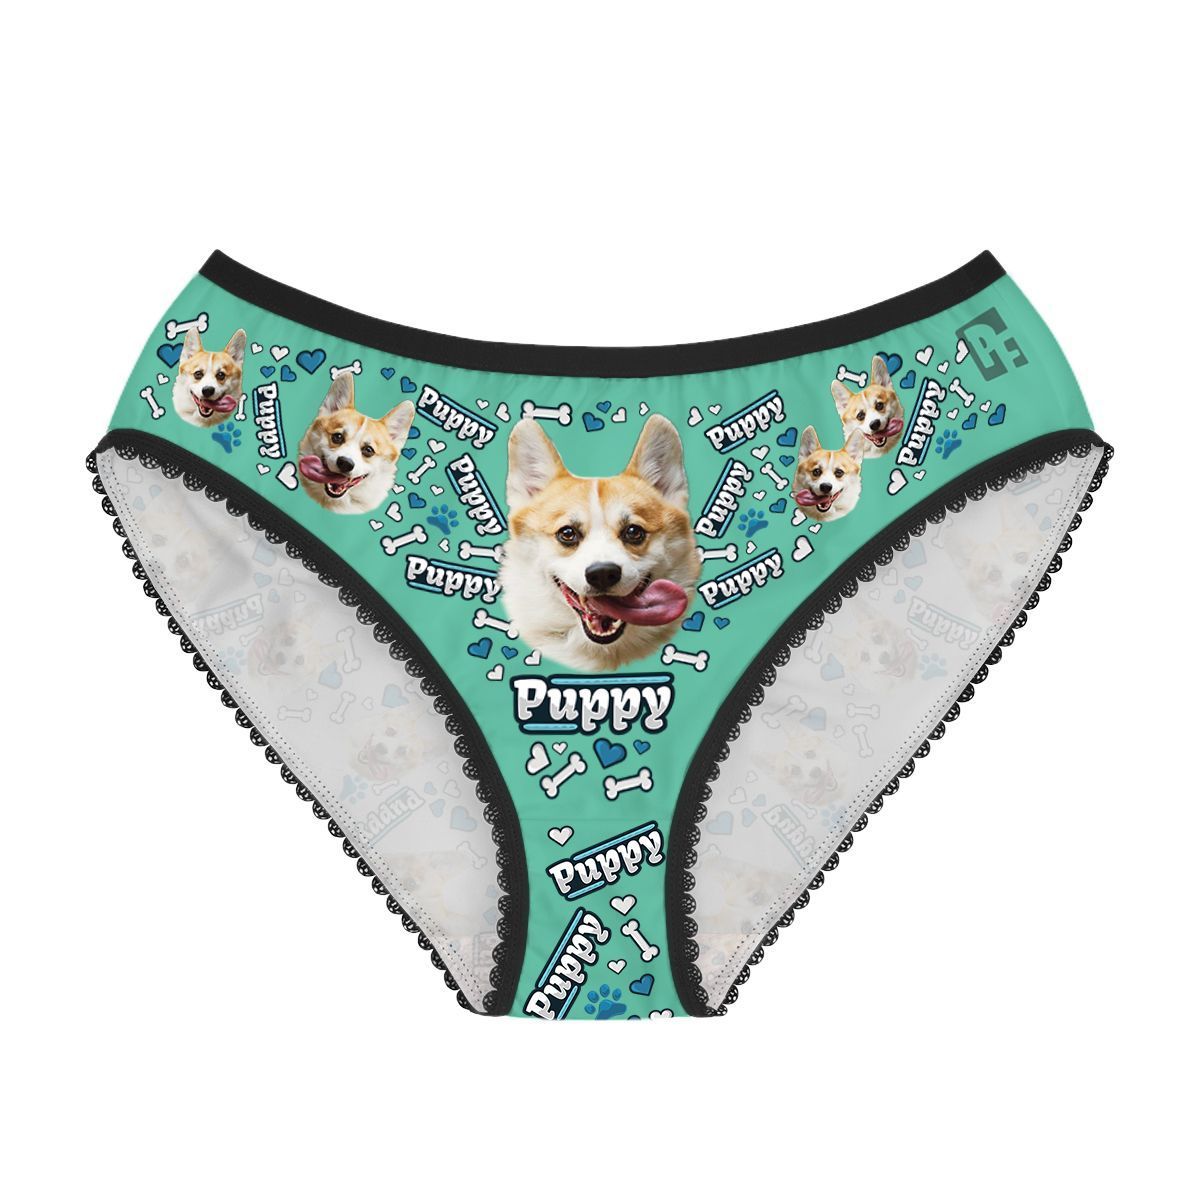 Mint Puppy women's underwear briefs personalized with photo printed on them